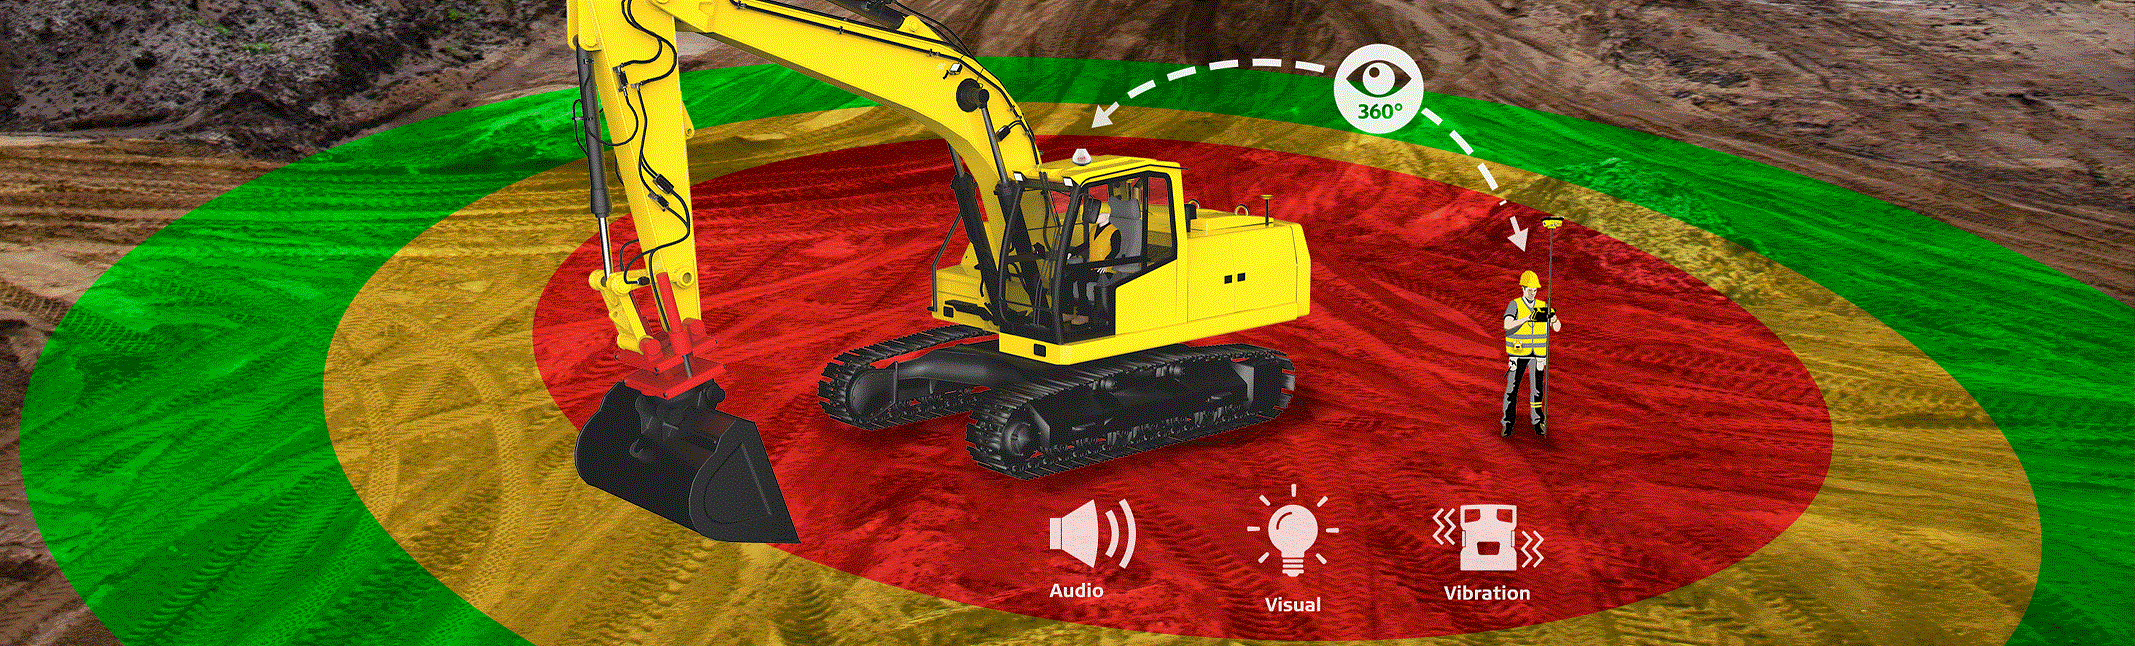 Leica Geosystems continues to focus on construction safety with latest personal alert technology